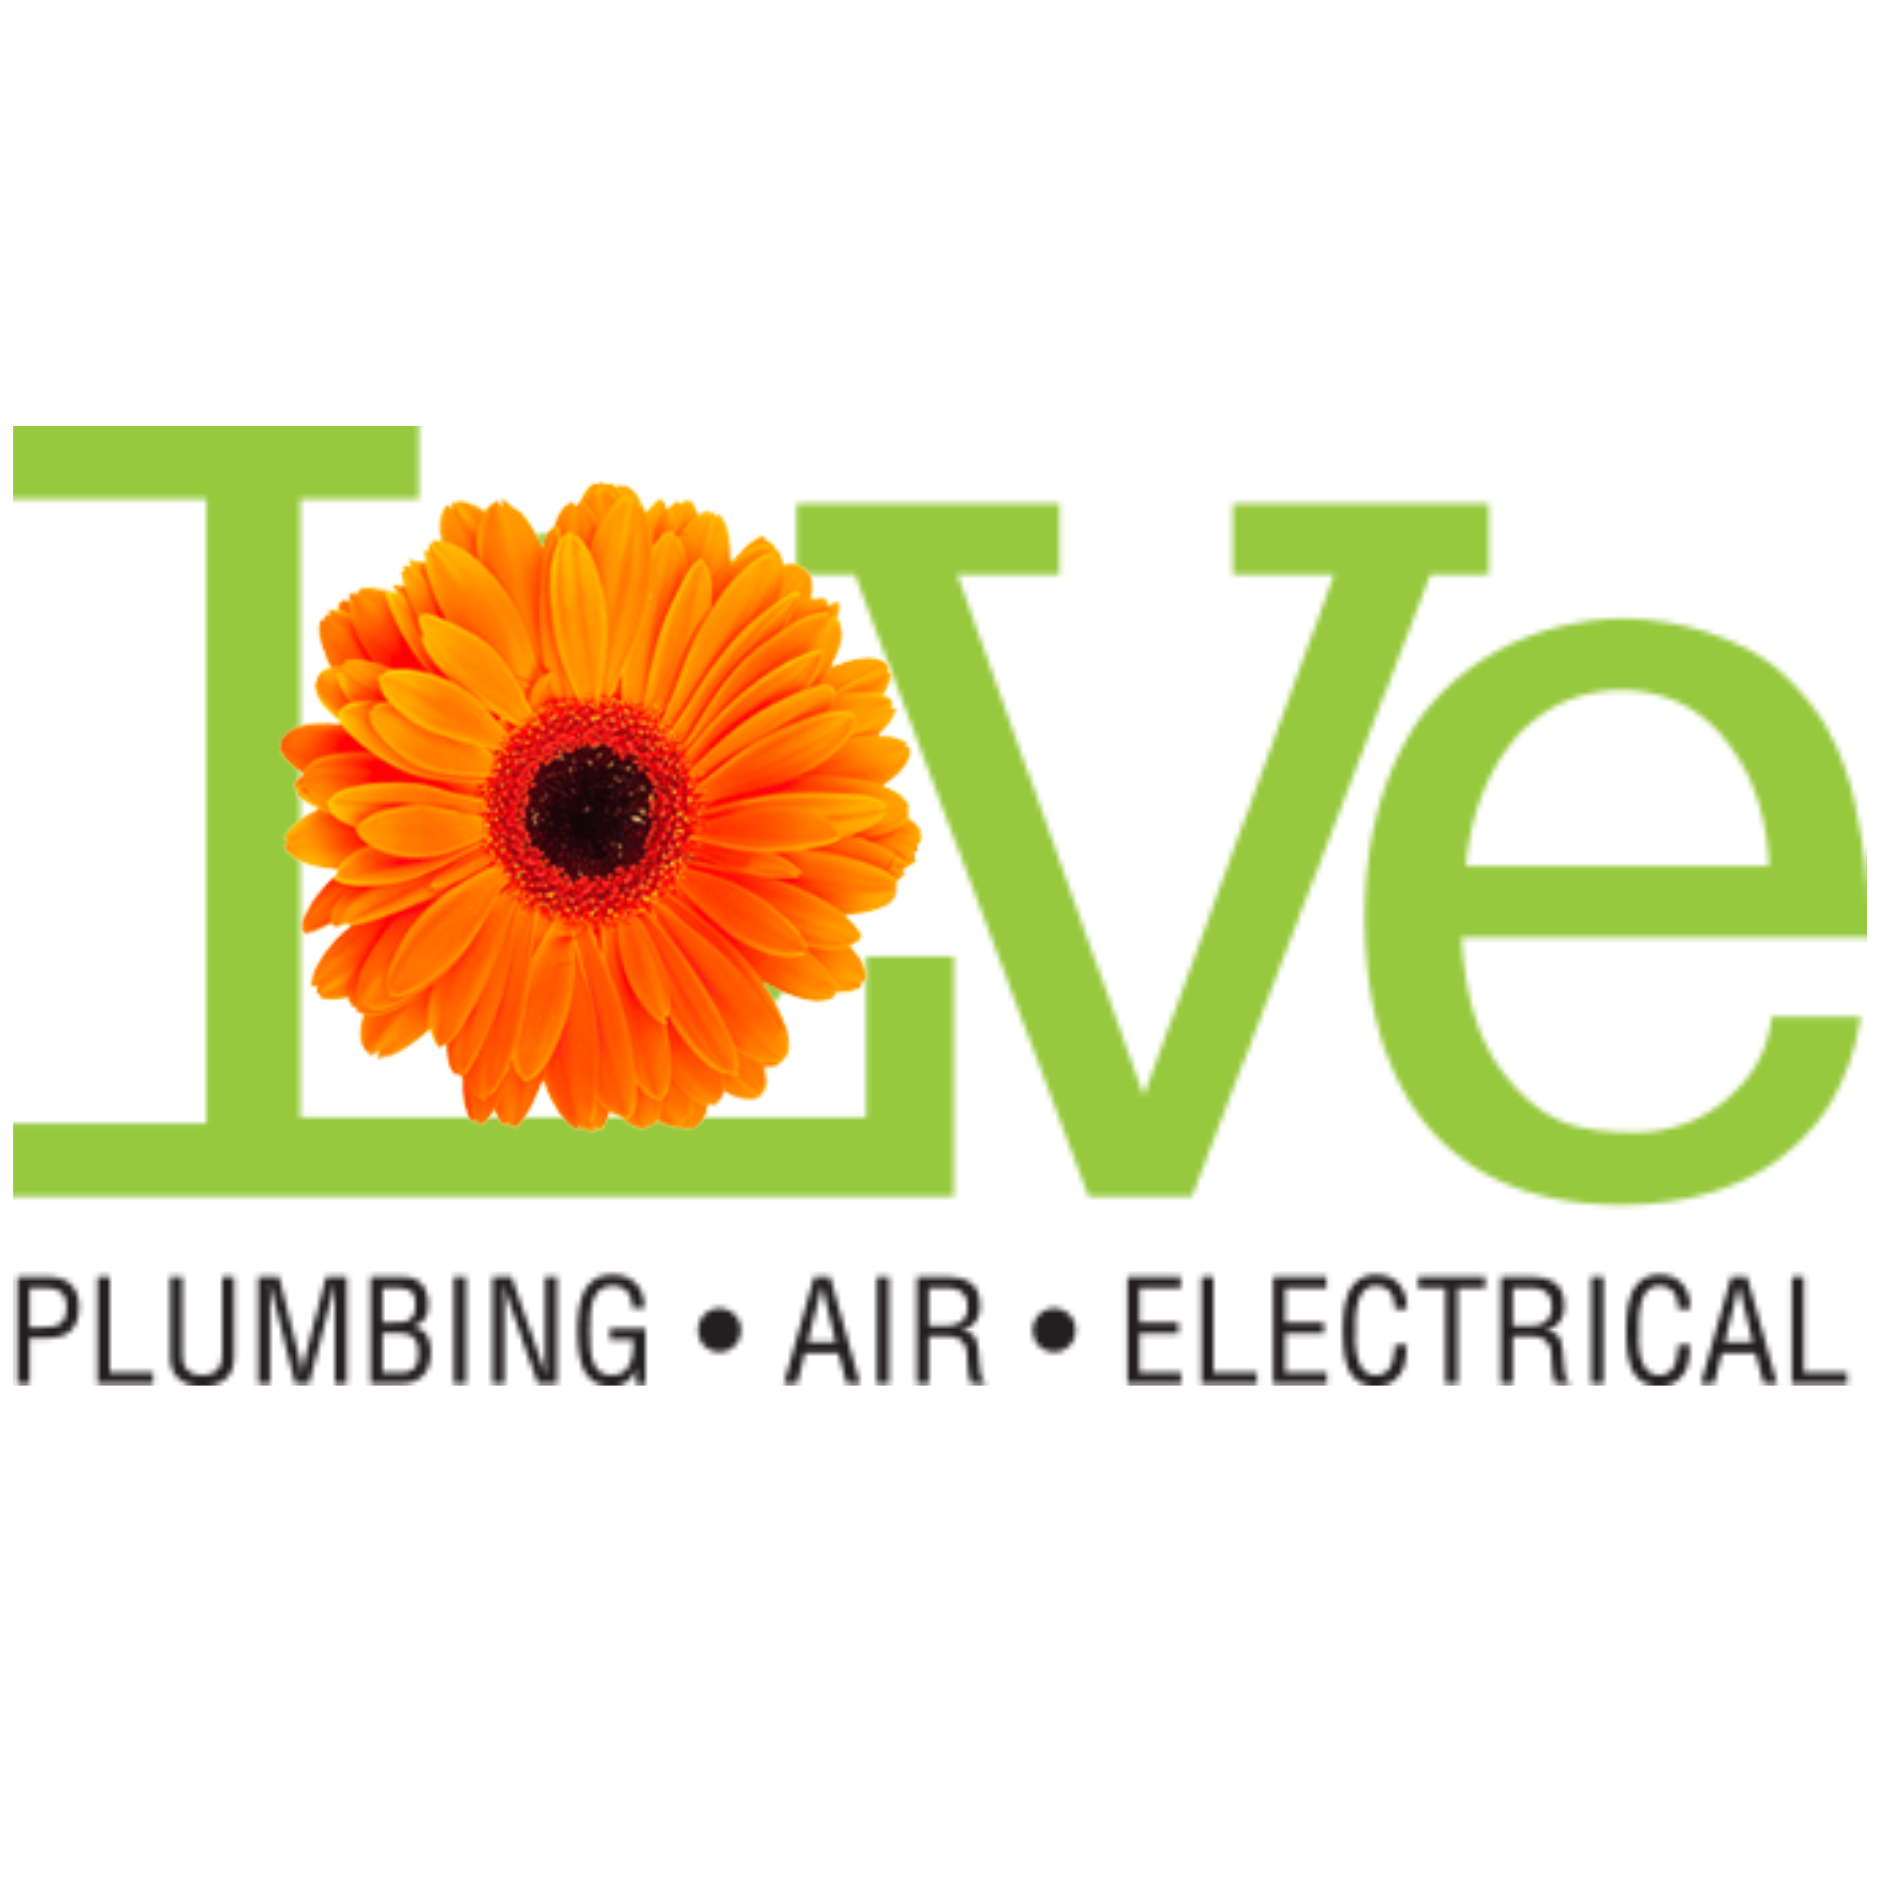 Love Plumbing Air & Electrical: Plumbing, Drains, HVAC and Electrical Experts Photo